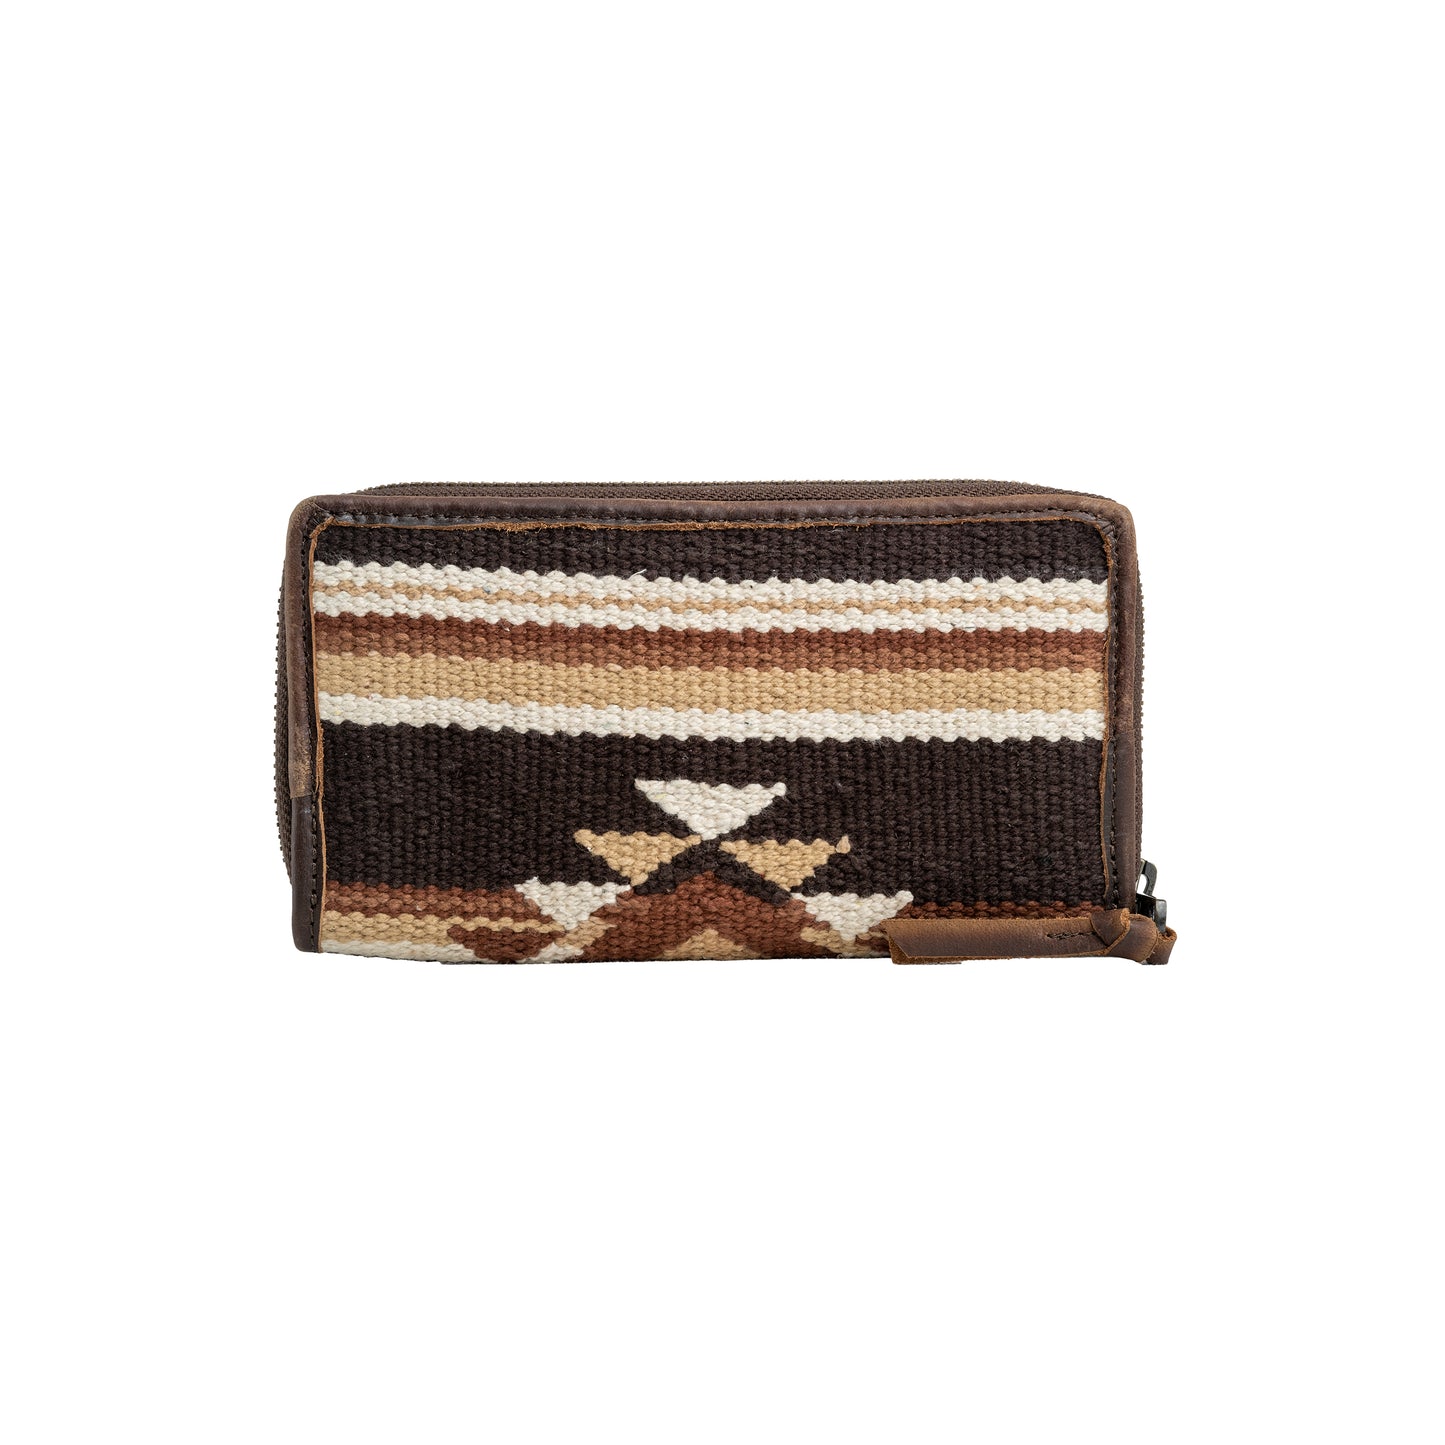 Load image into Gallery viewer, Sioux Falls Ladies Bifold By STS Ranchwear
